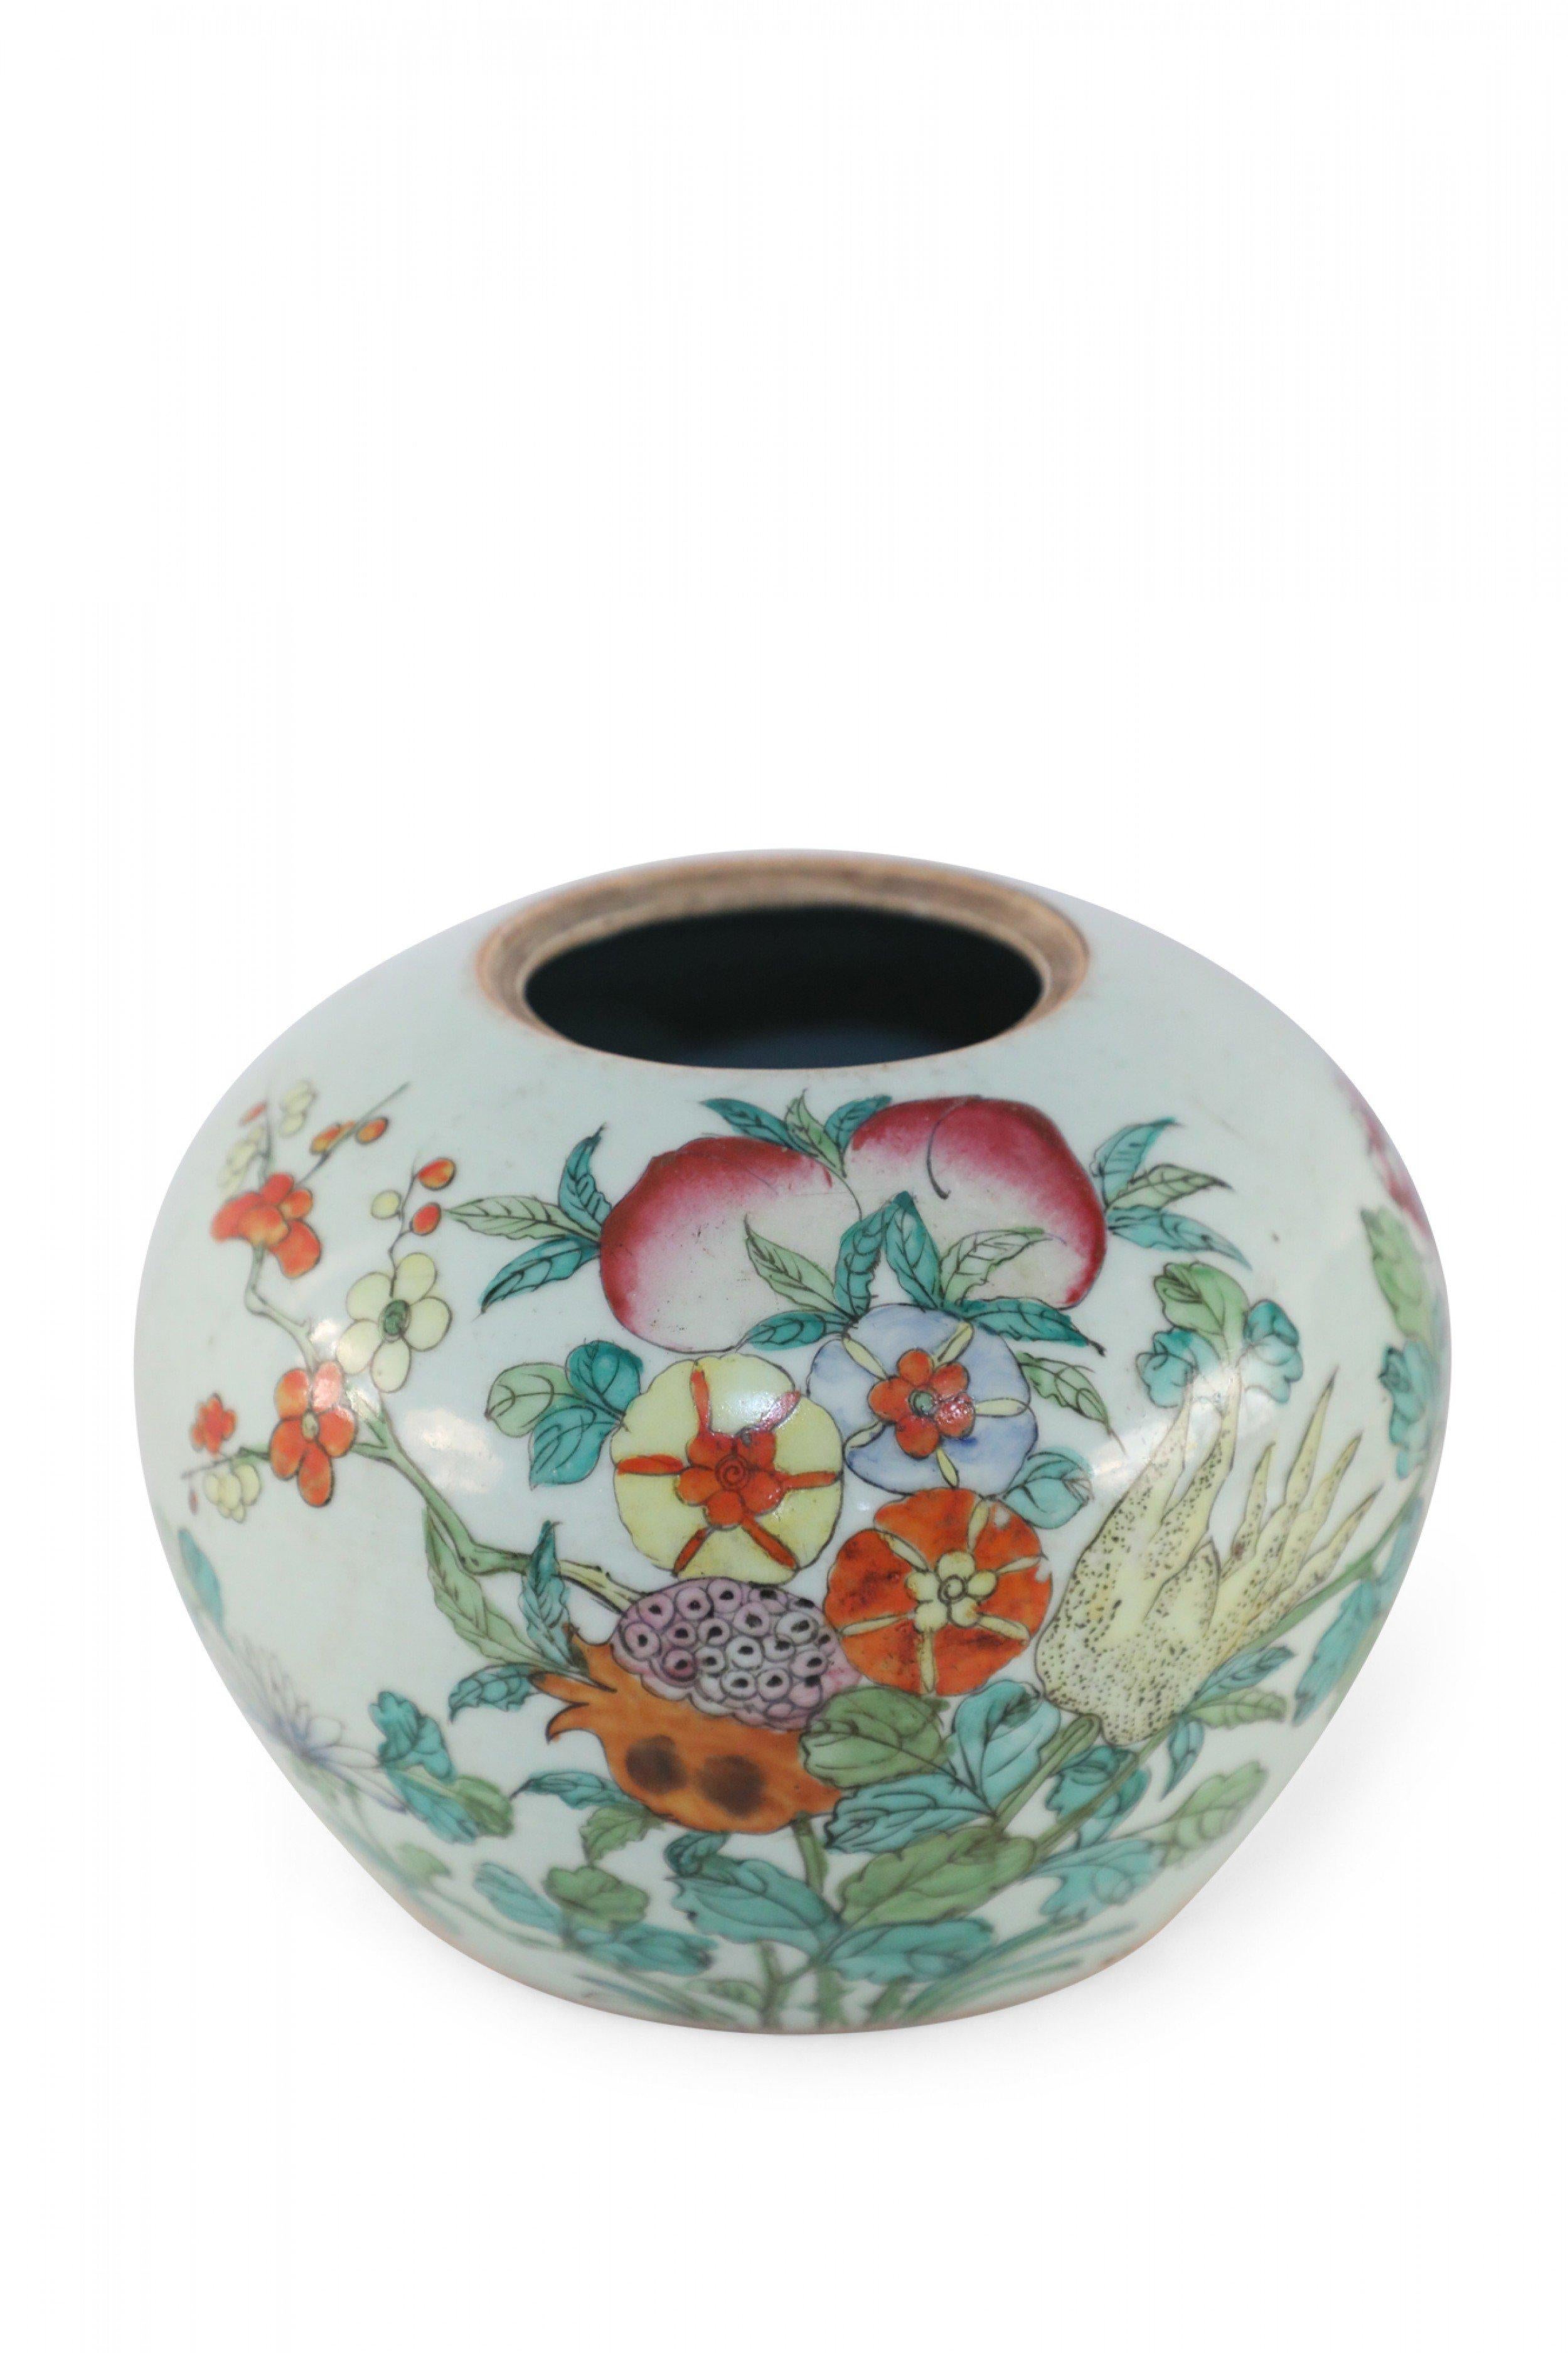 Chinese White and Floral Rounded Porcelain Watermelon Jar For Sale 6